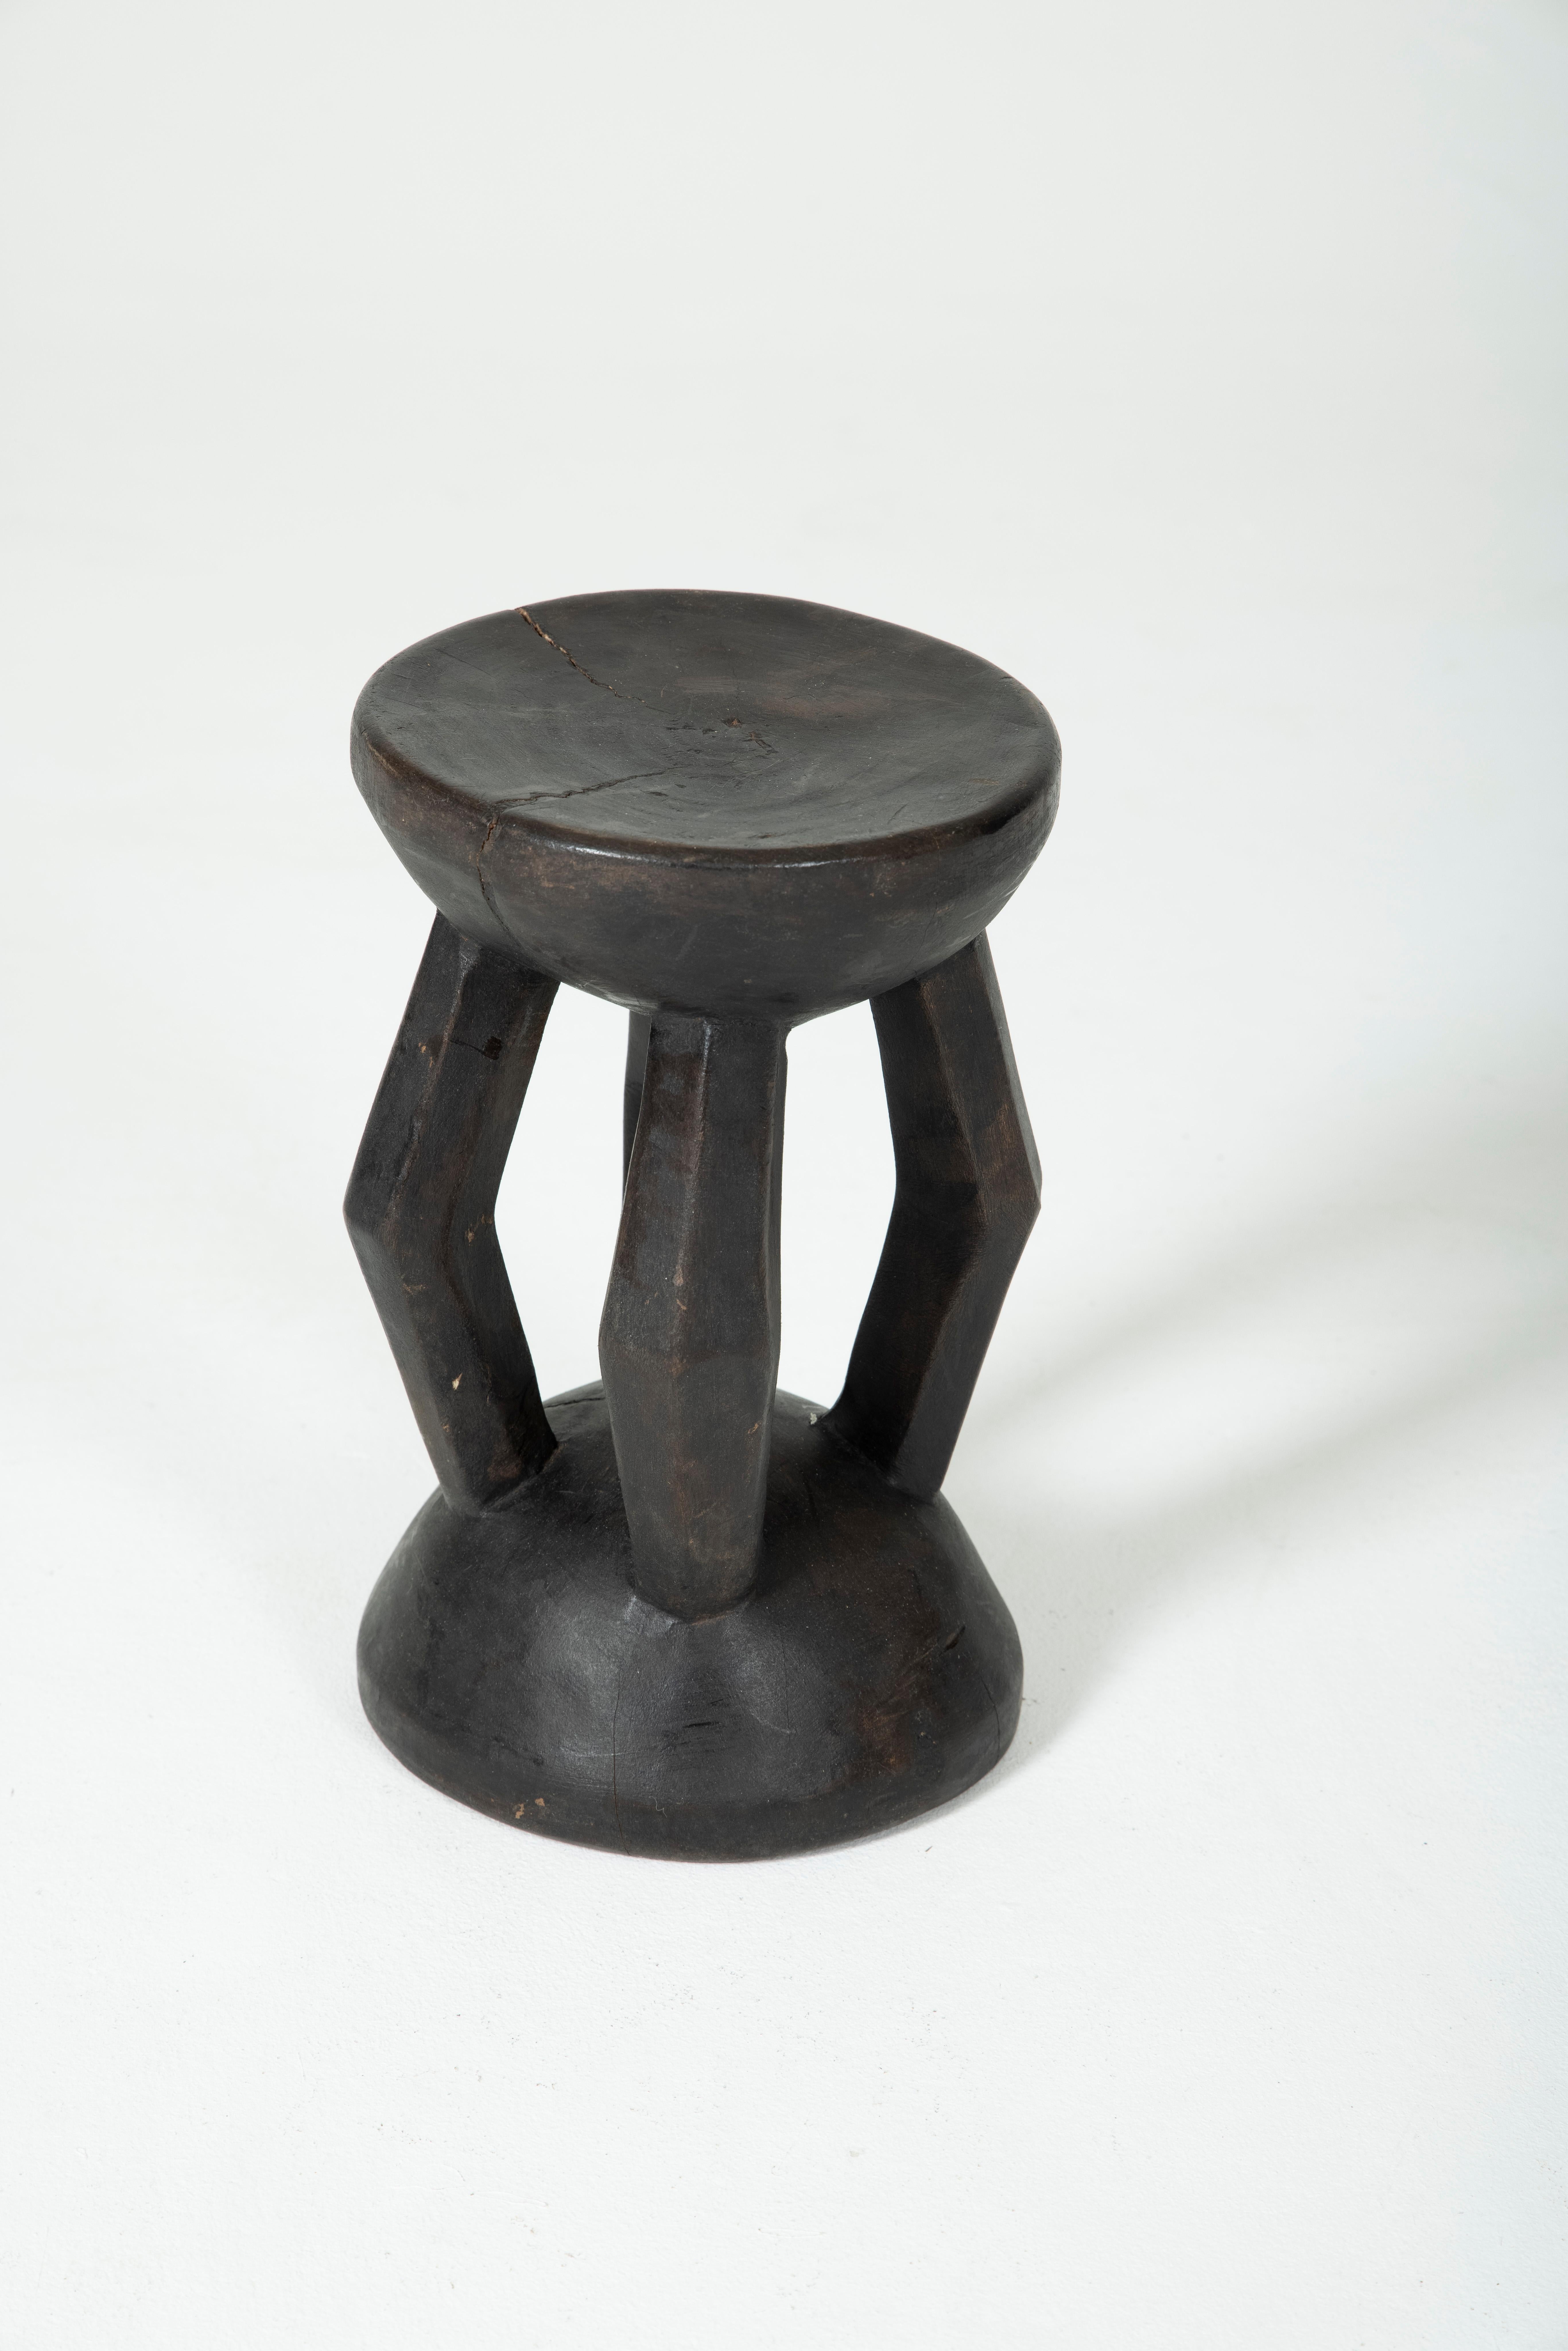 Ivorian Stool or Side Table Dogon